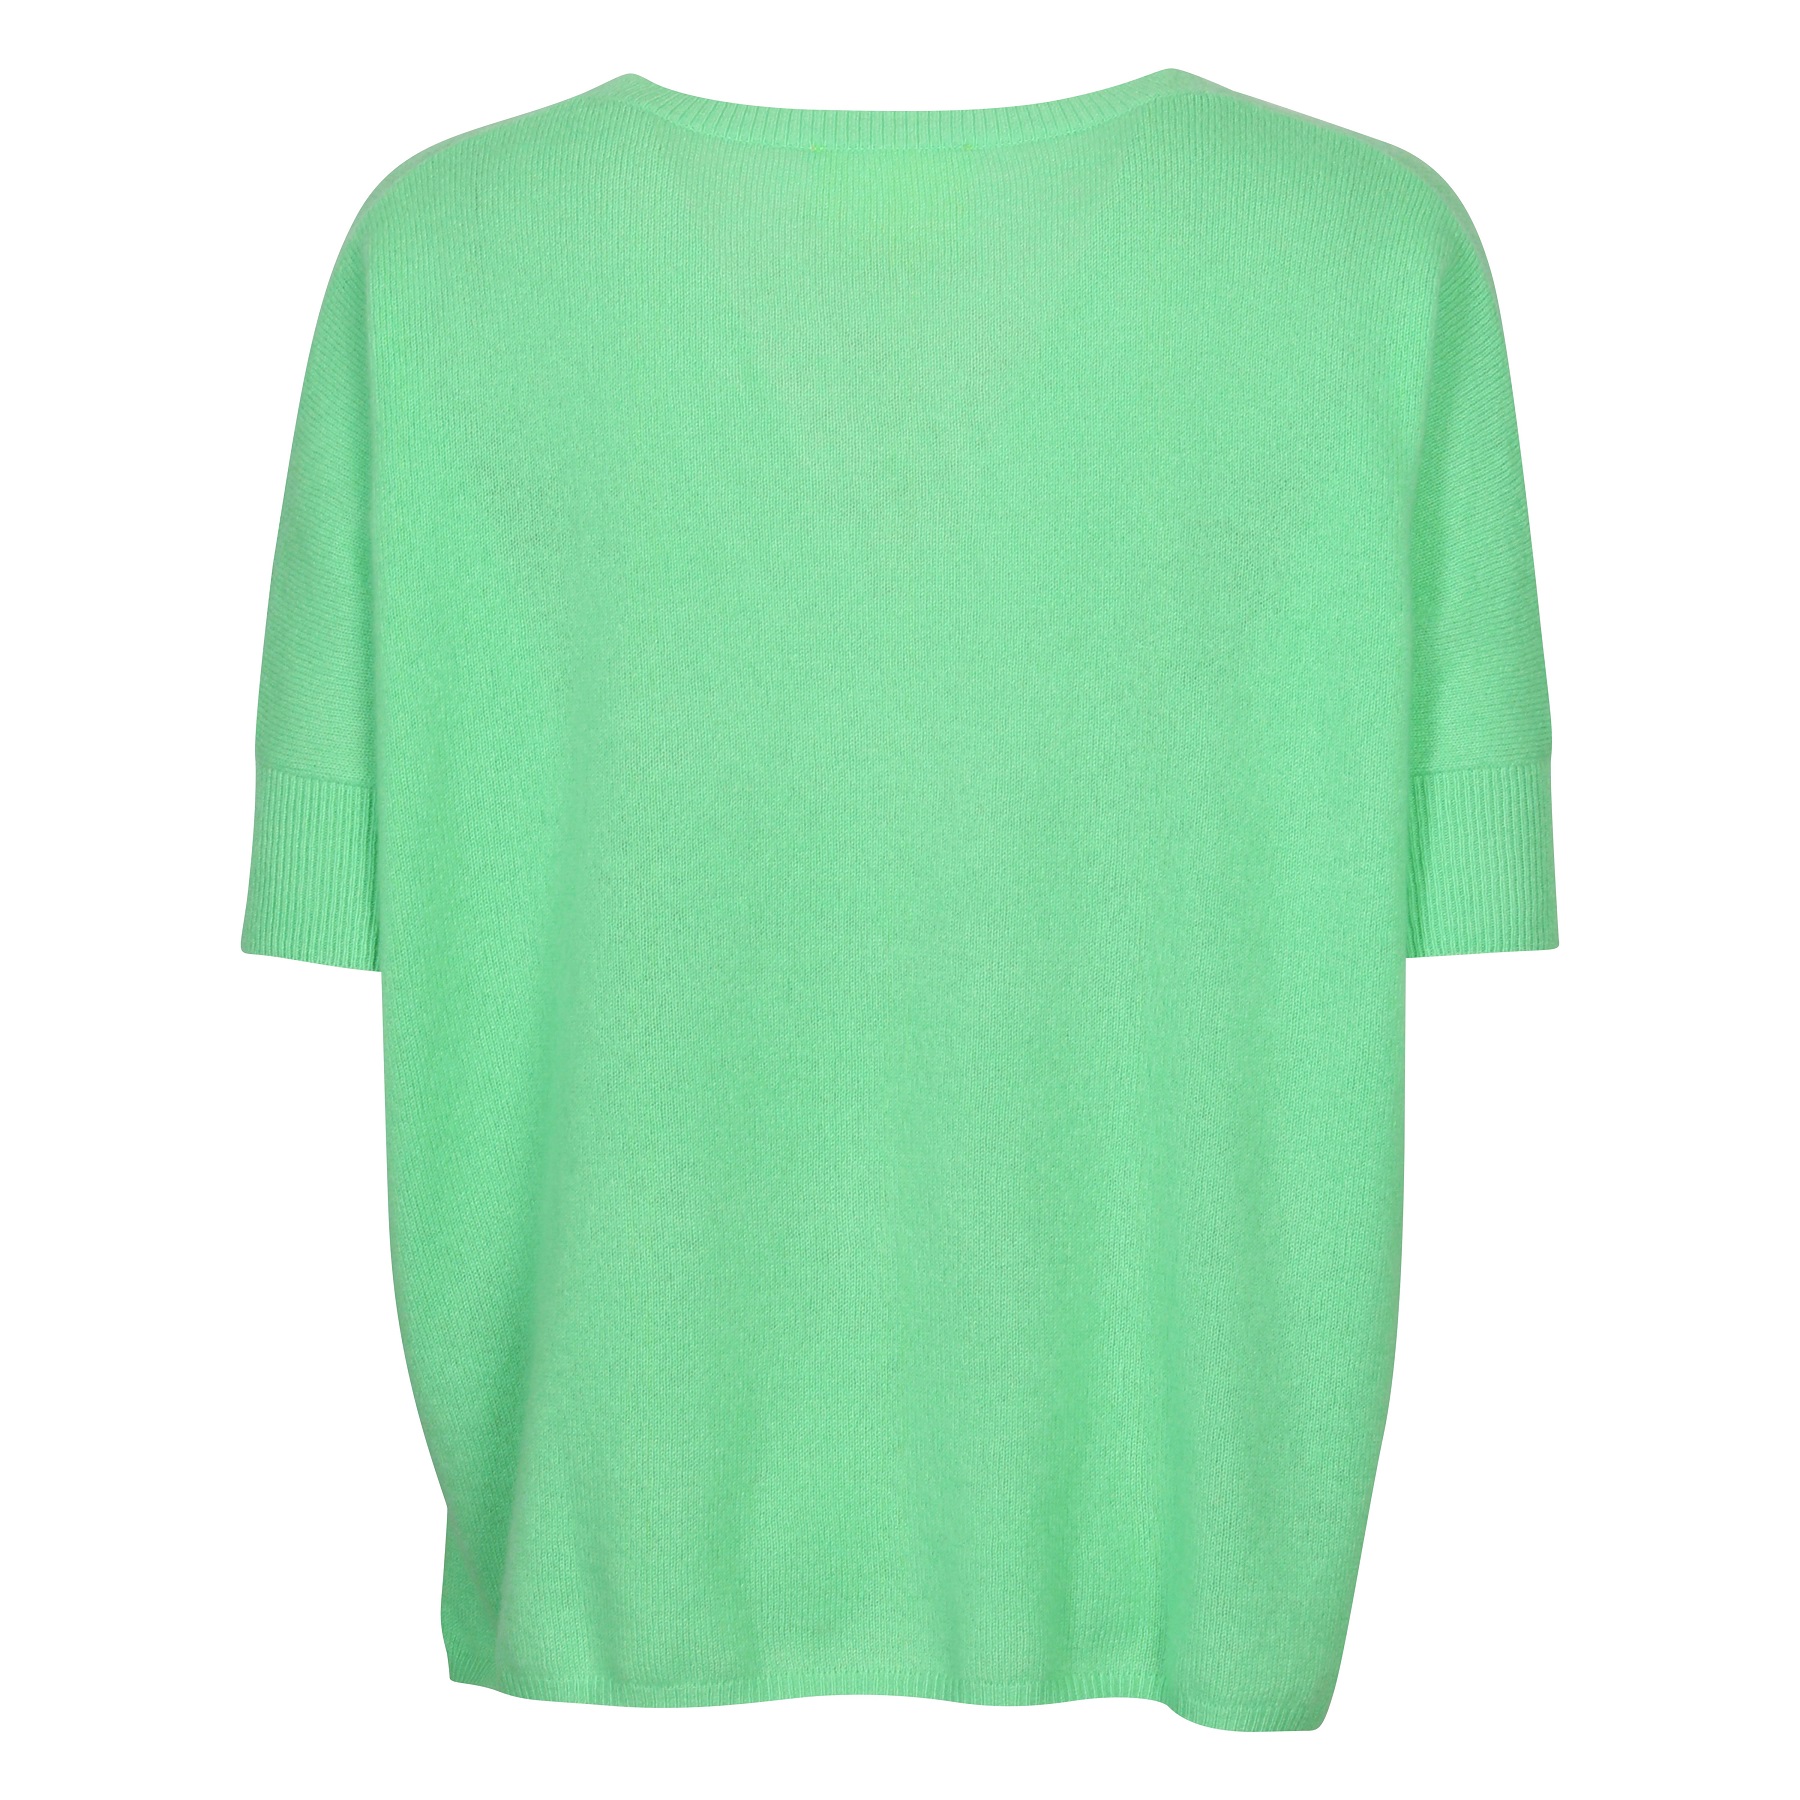 Absolut Cashmere Poncho Kate in Light Green S